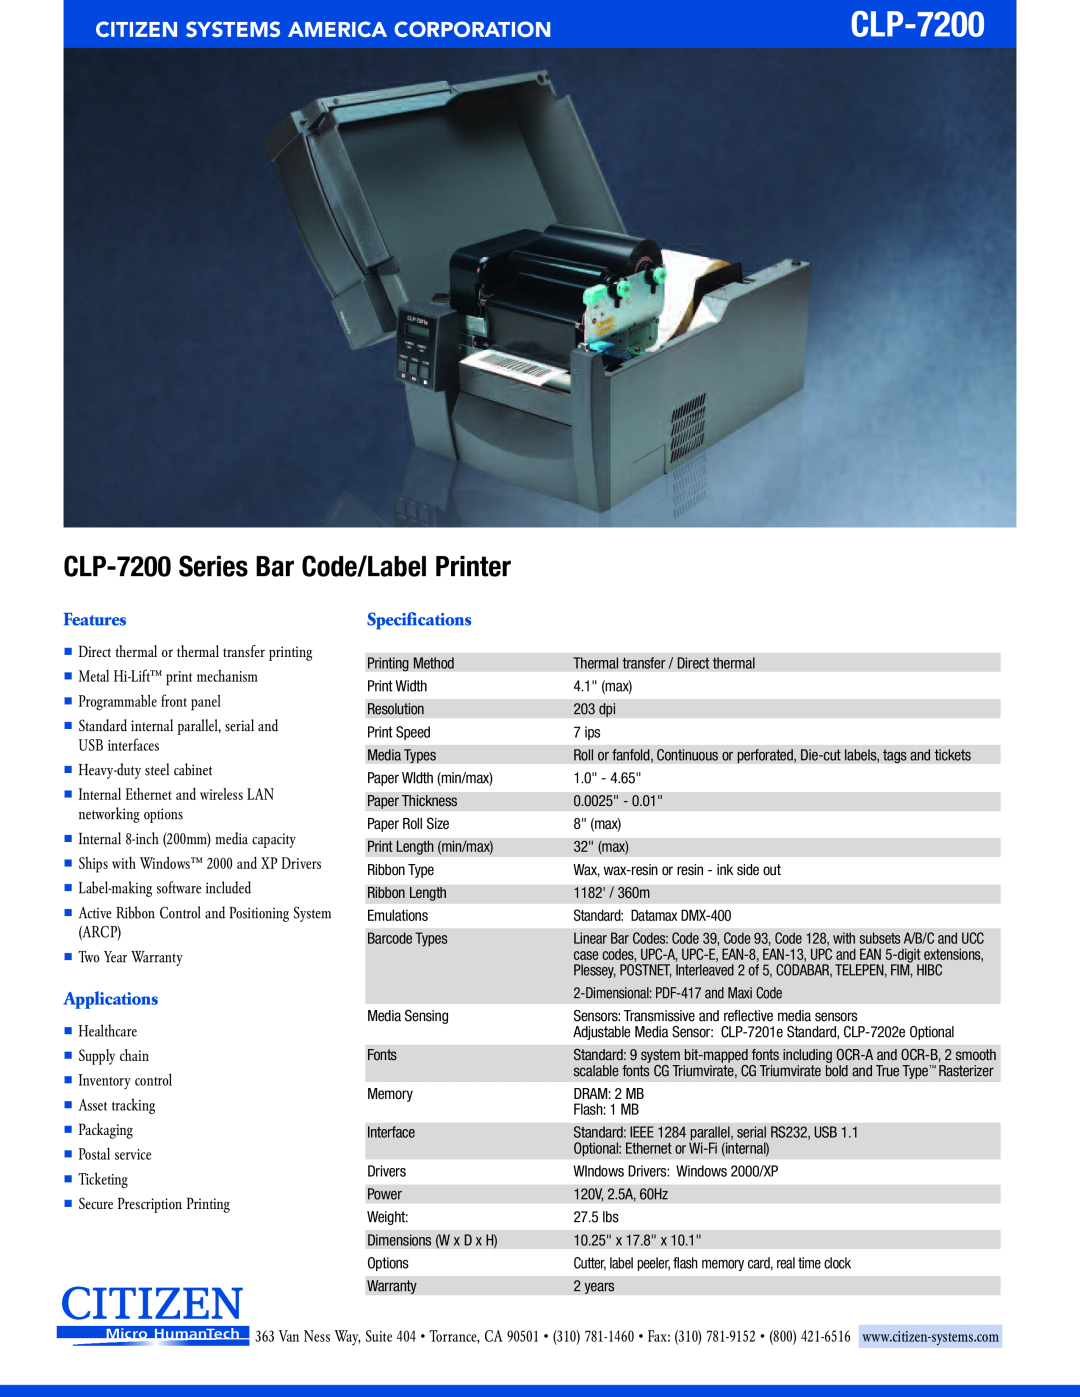 Citizen Systems CLP-7200 Series Bar Code/Label Printer, Citizen Systems America Corporation, Features, Applications 